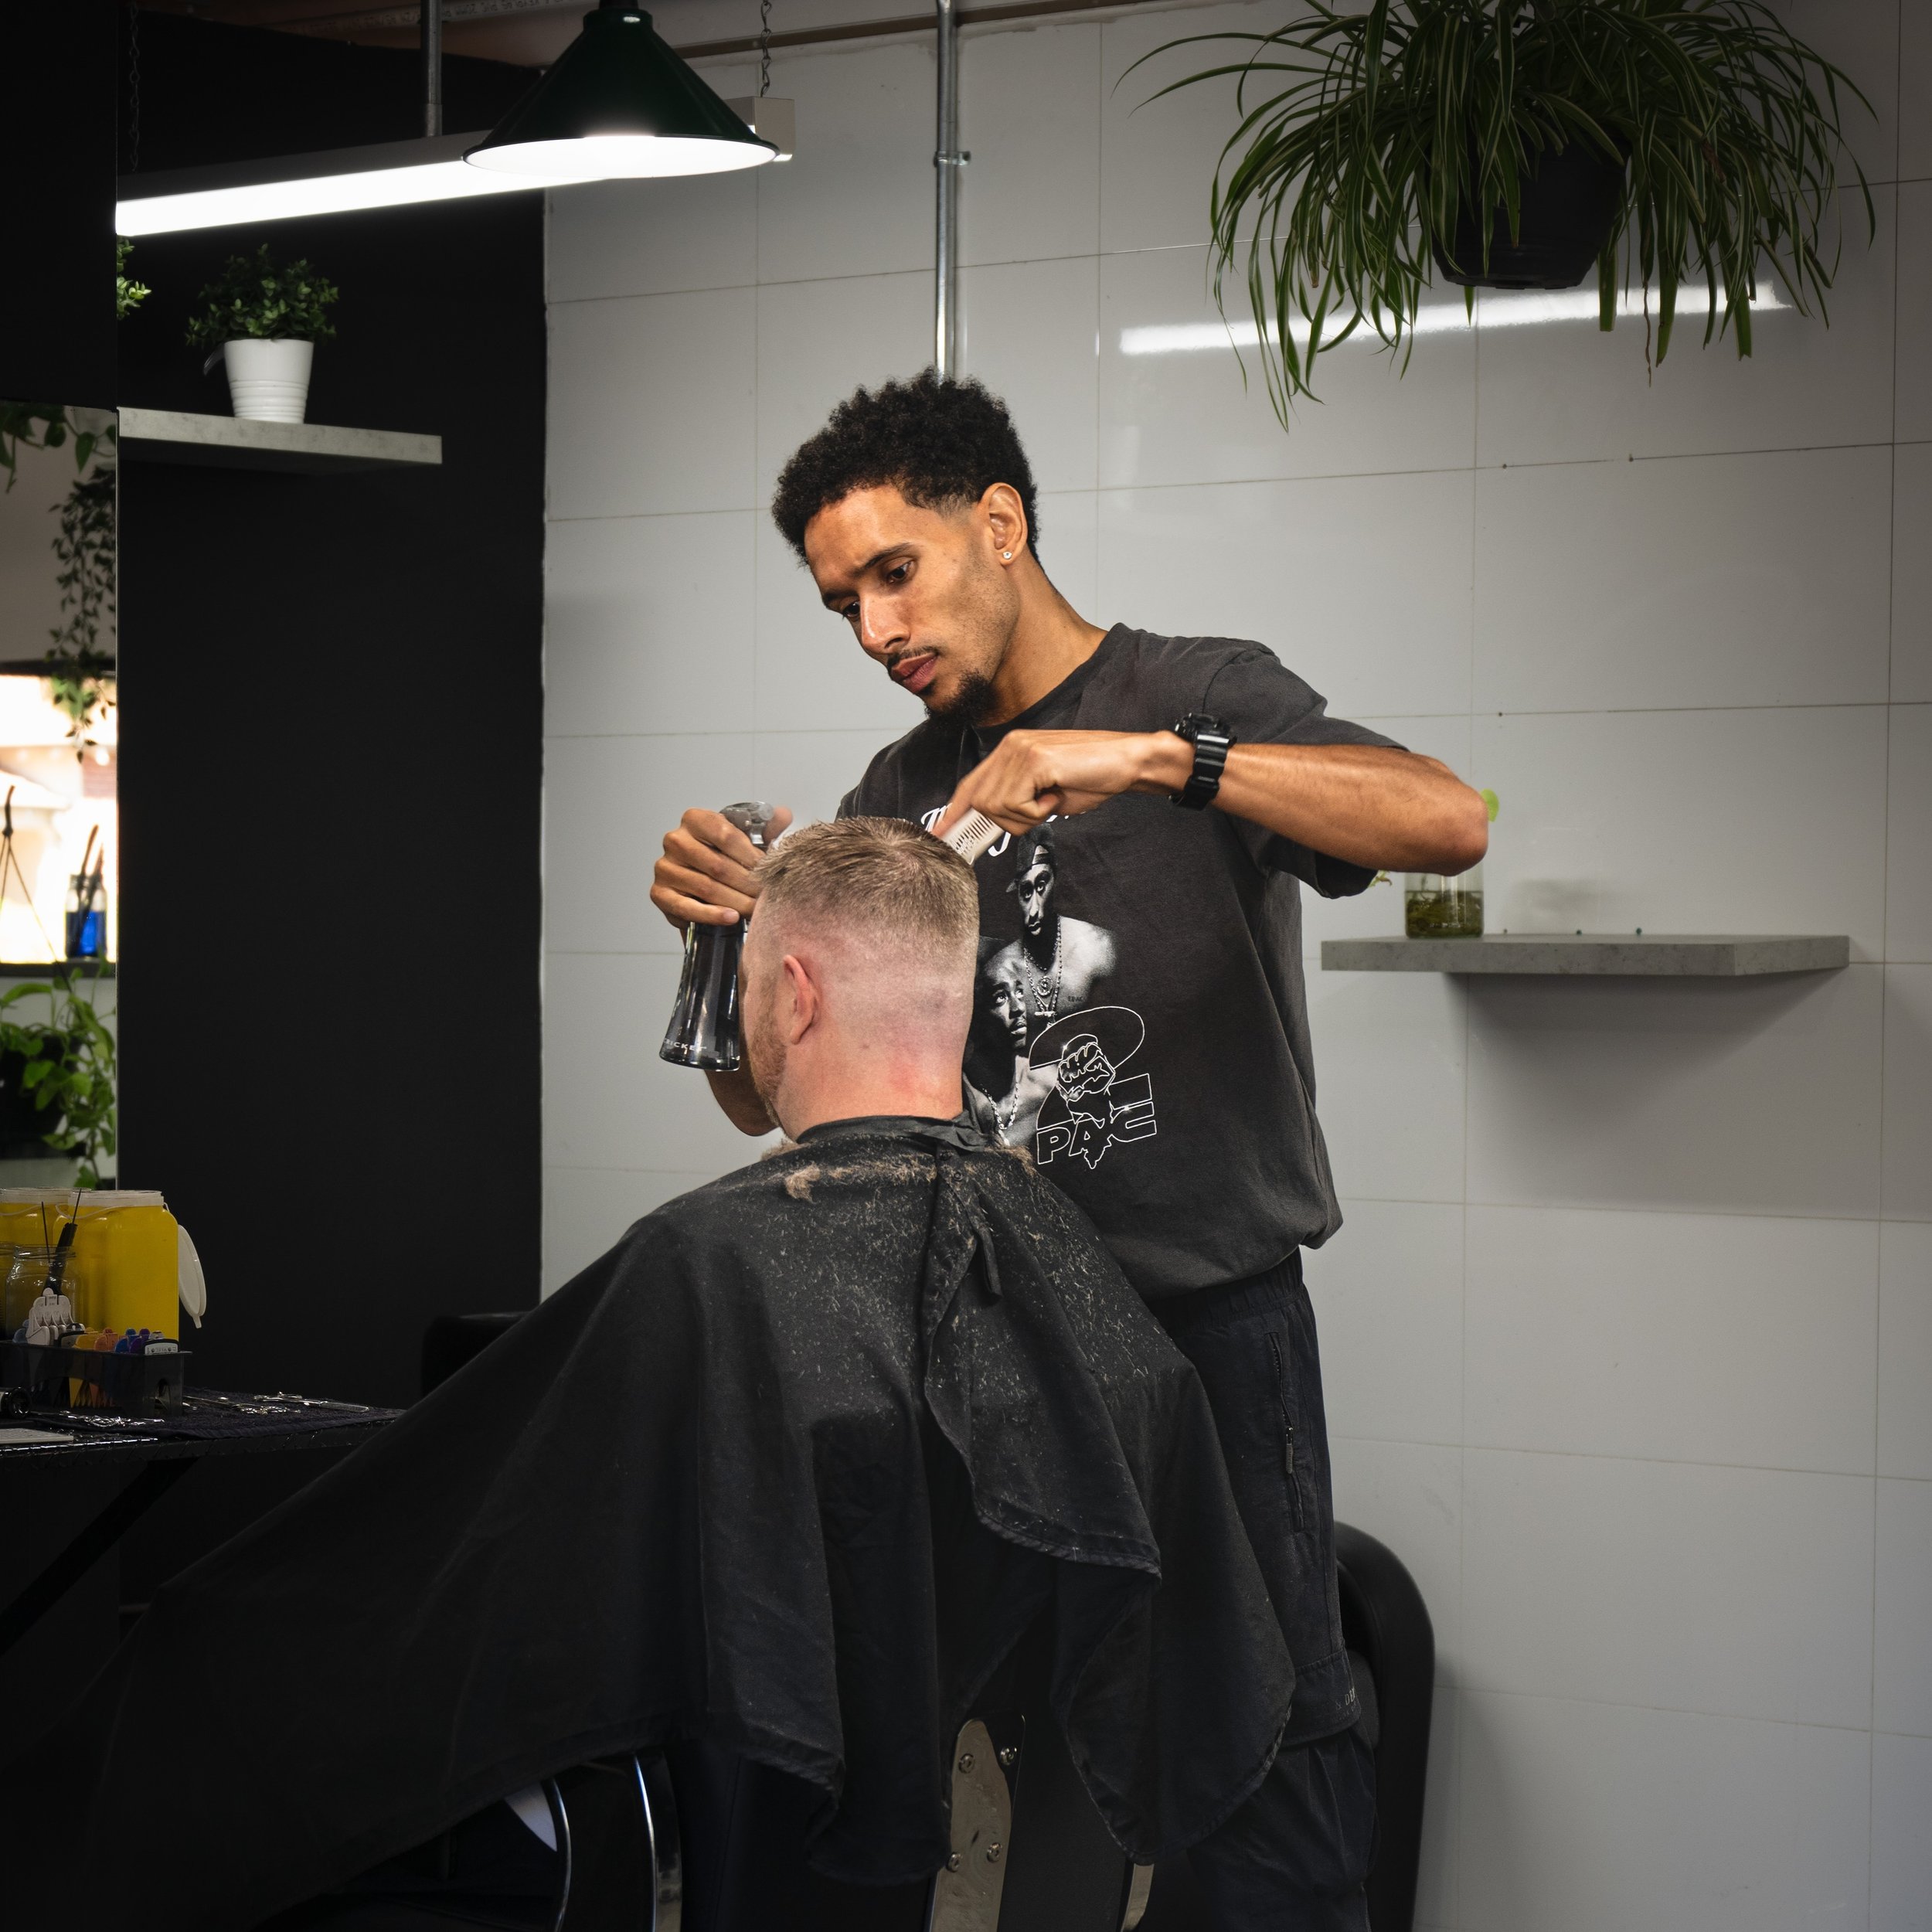 Bookings are filling up! Secure your spot in time for the weekend💈